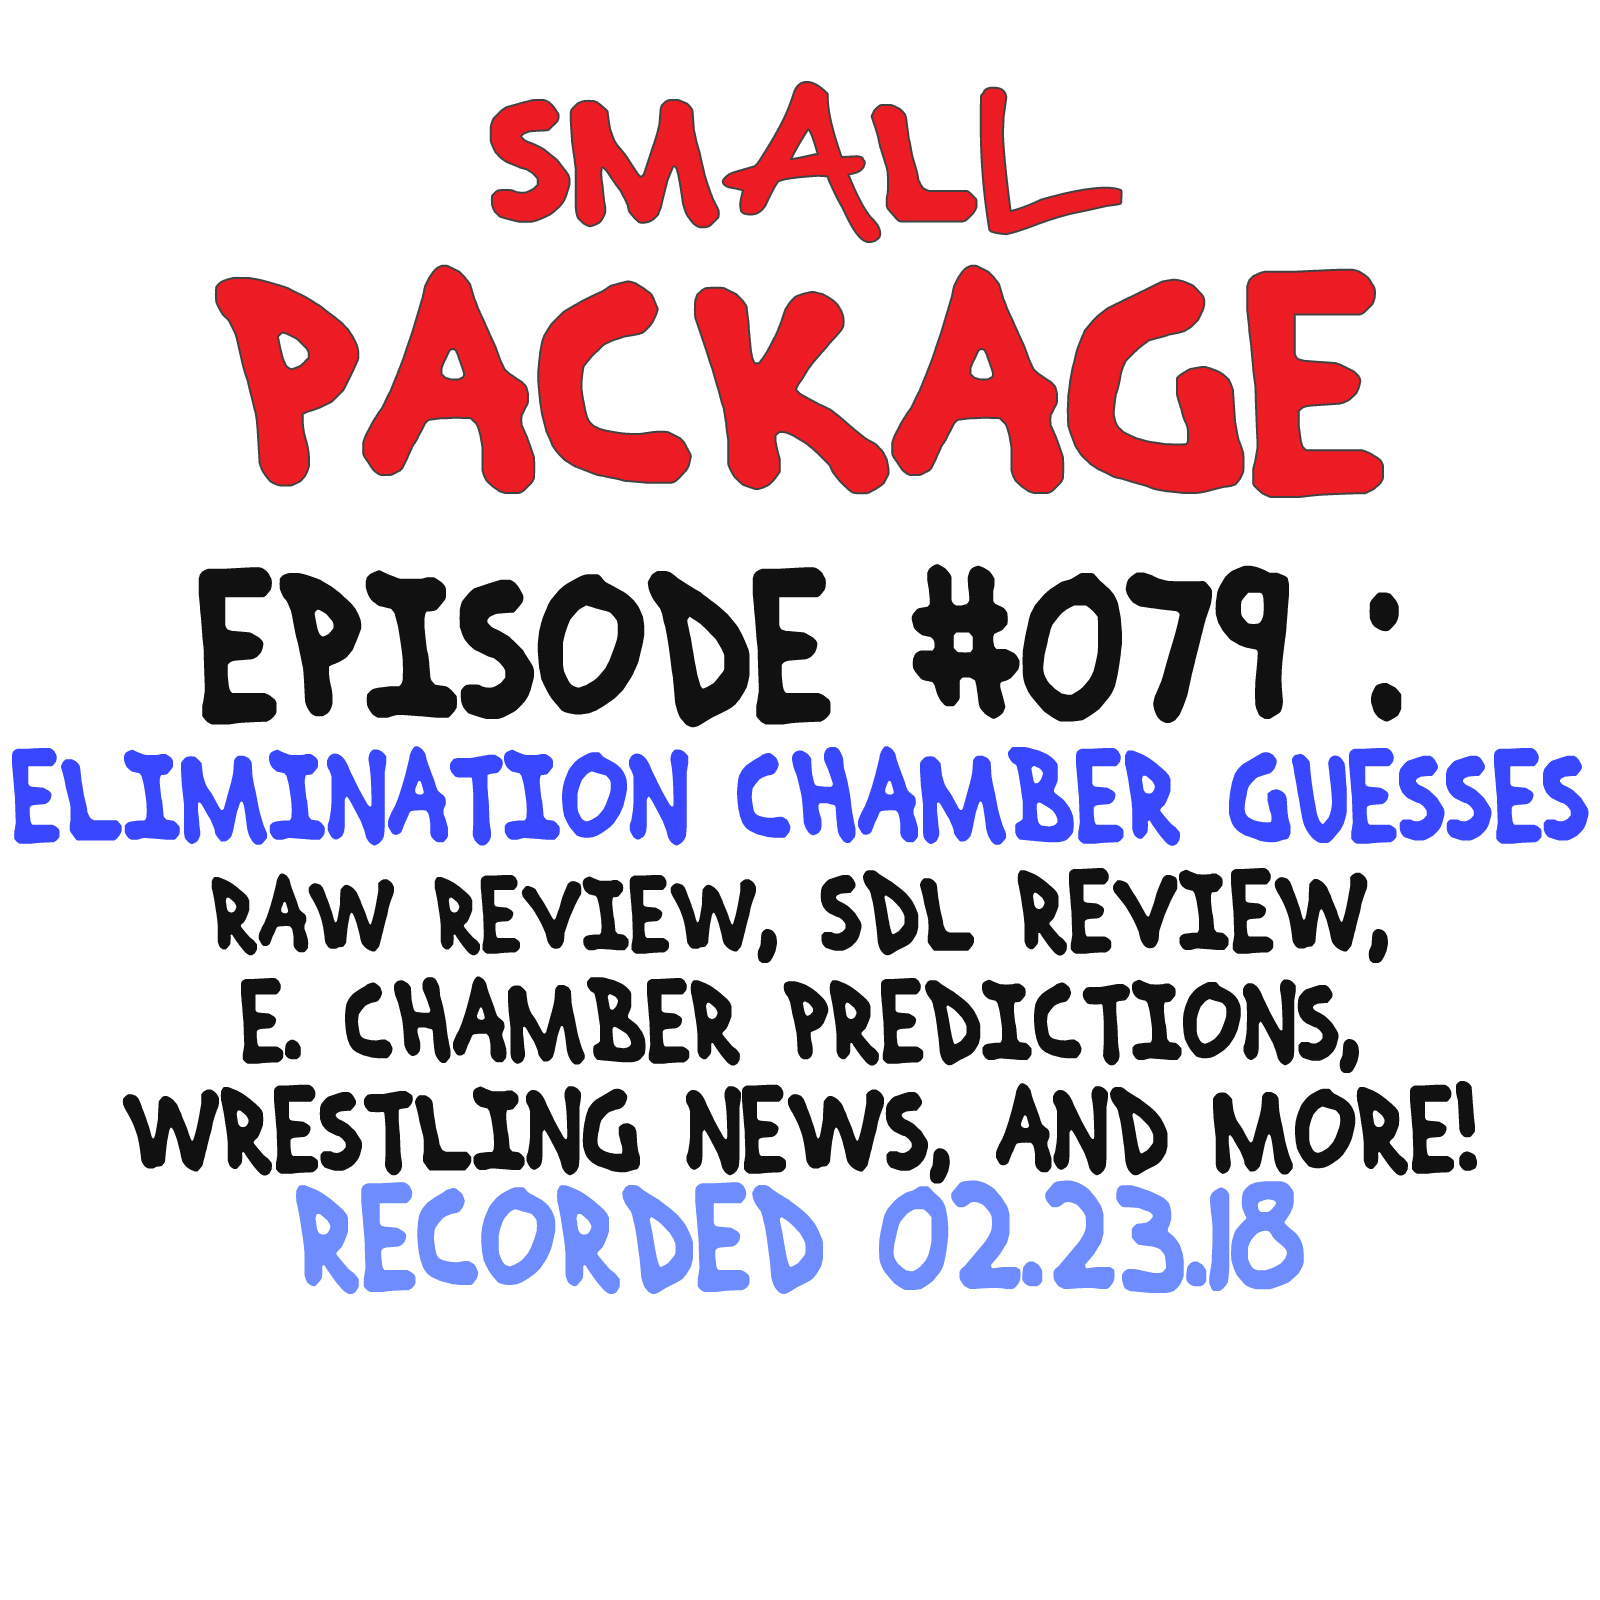 Episode 079: Elimination Chamber Guesses [02/23/18]